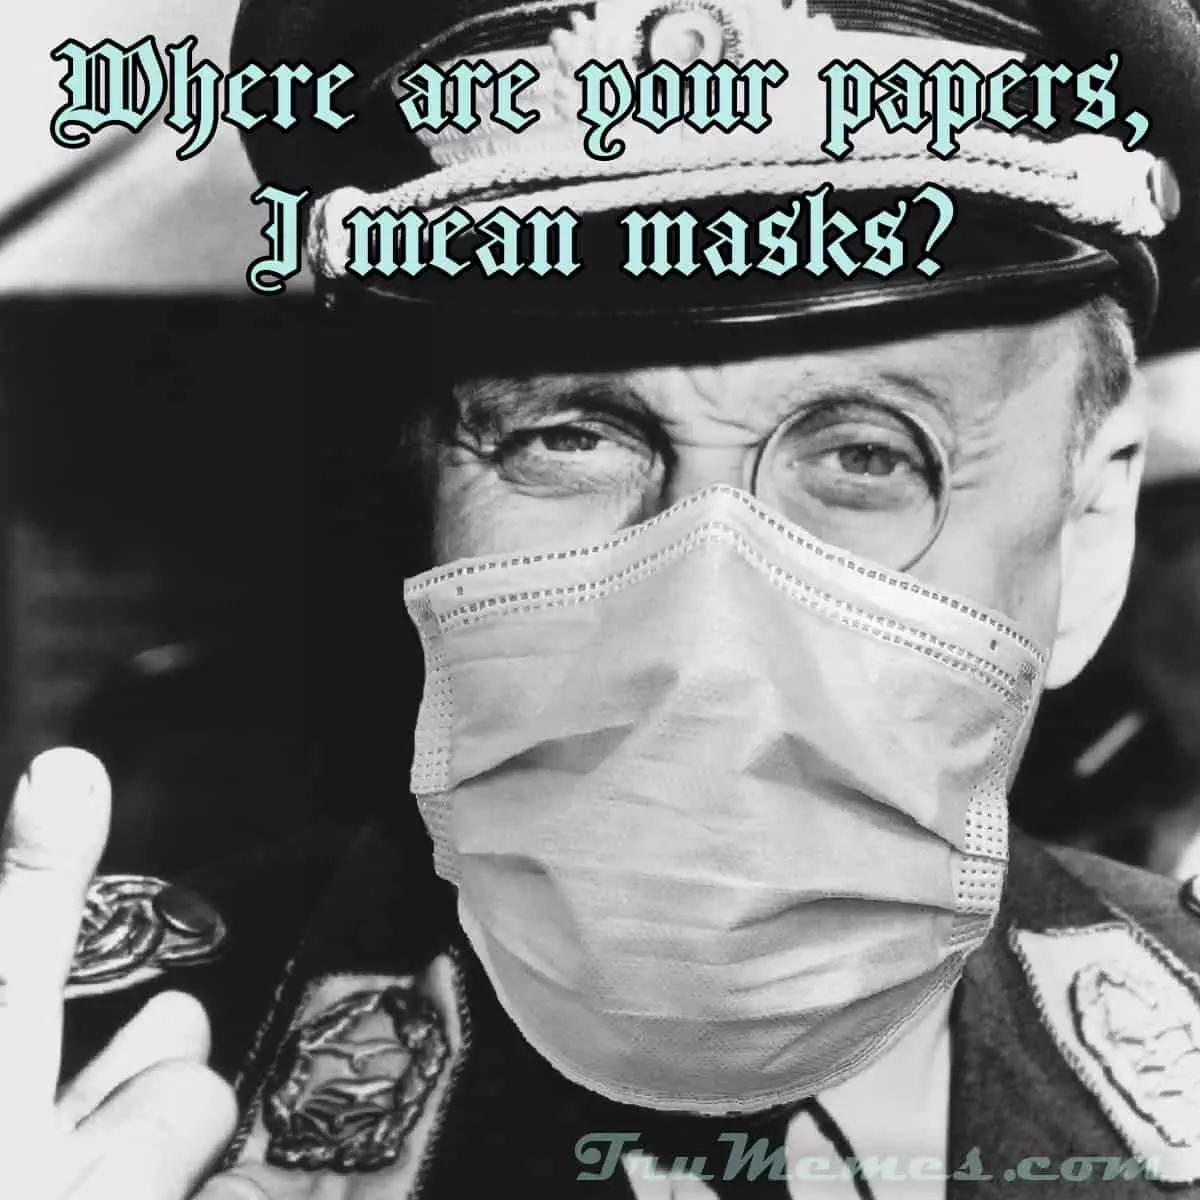 Where are your papers, I mean masks?